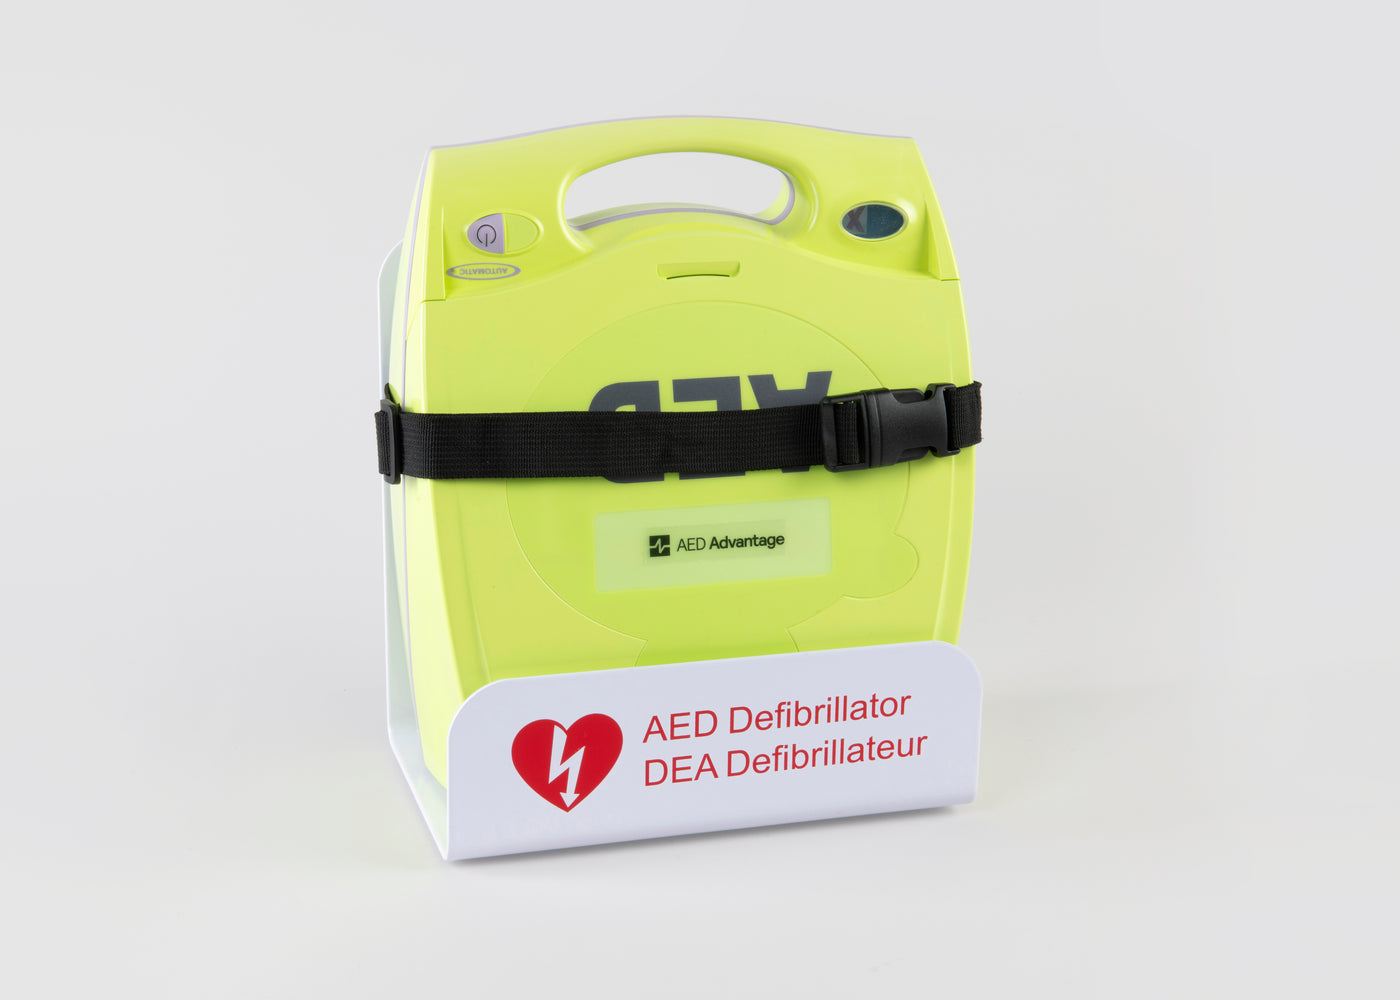 A green ZOLL AED Plus machine strapped into a white metal wall mount bracket